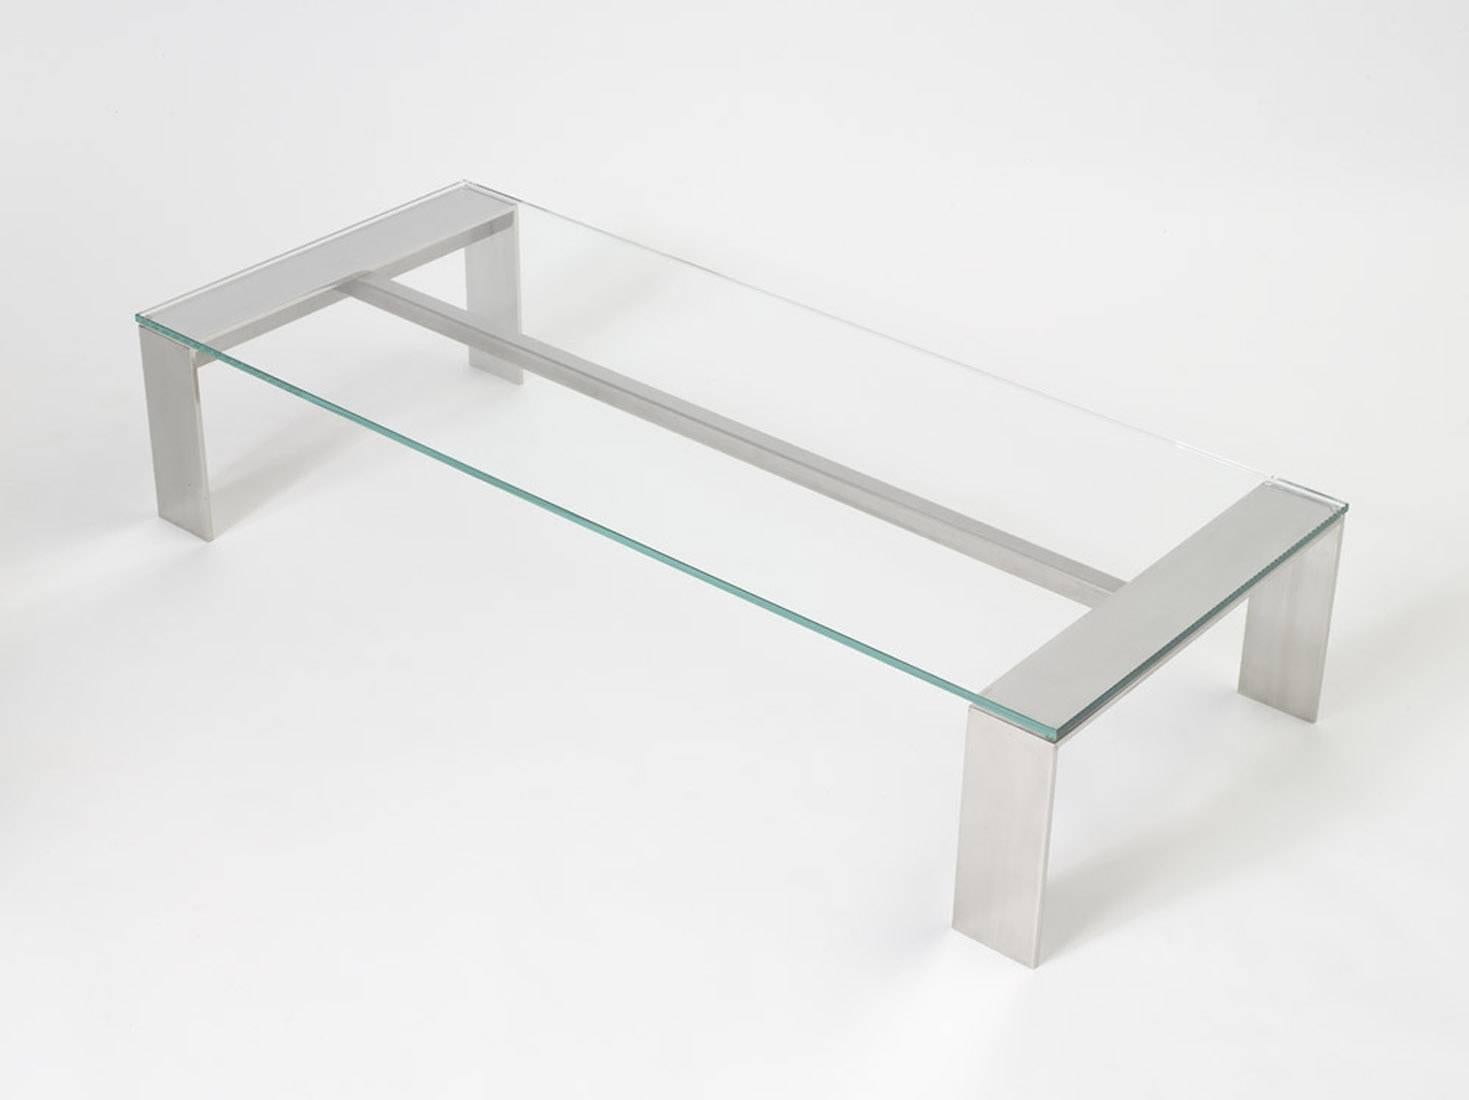 Bridge coffee table.
Stainless steel with mirror polished and brush finish. Clear glass. Minimal, clean finish makes for a very elegant design.